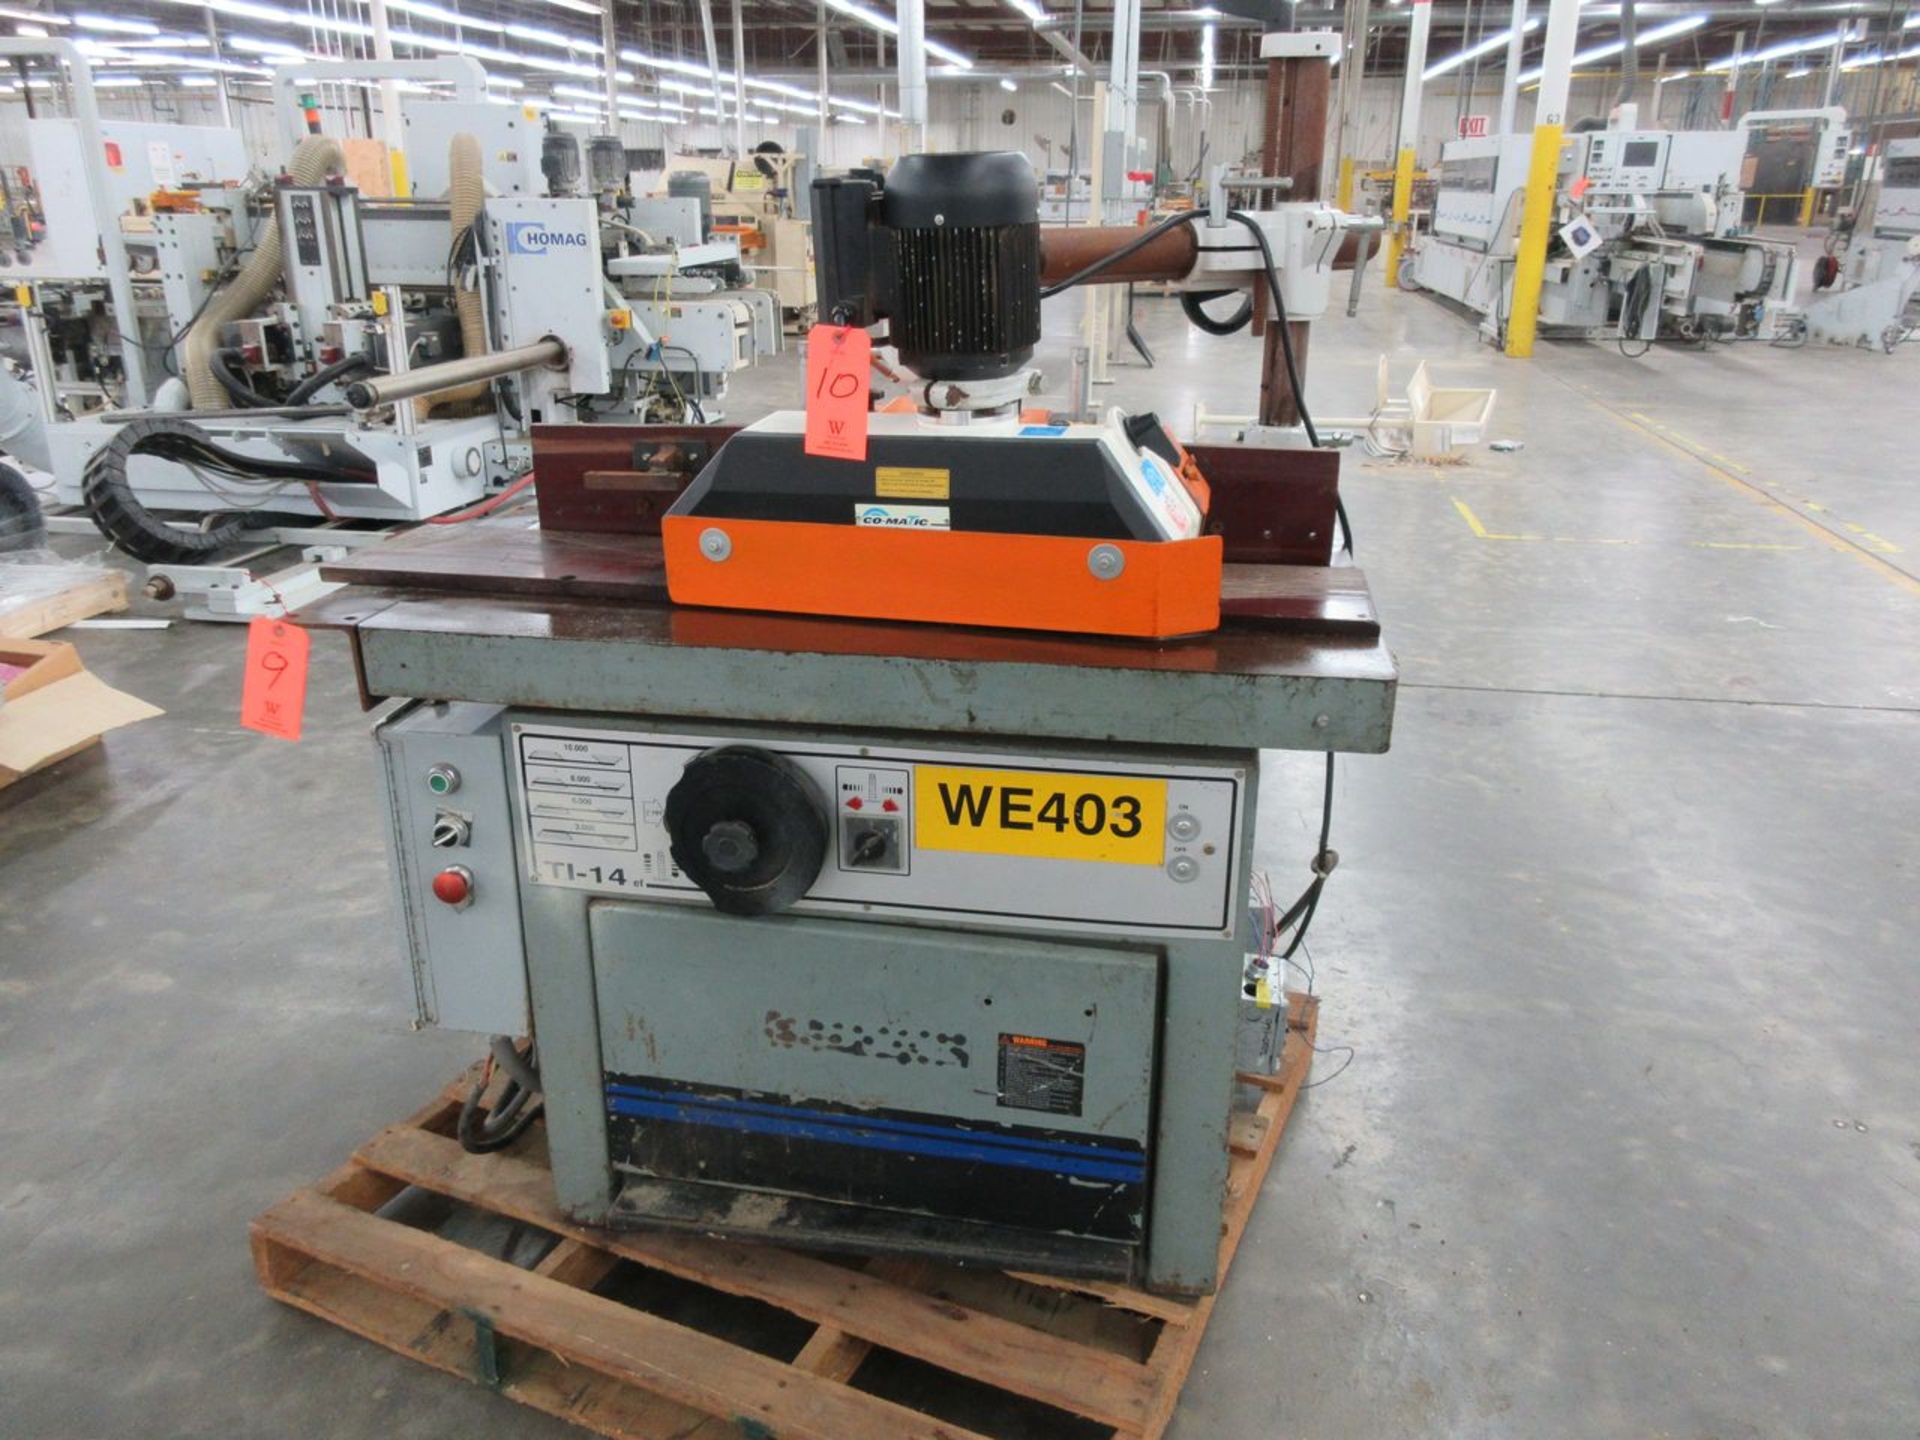 Invicta Model TI-14 Single Spindle Vertical Shaper, S/N: 2587 (2006); with 2 in. Arbor, 10,000